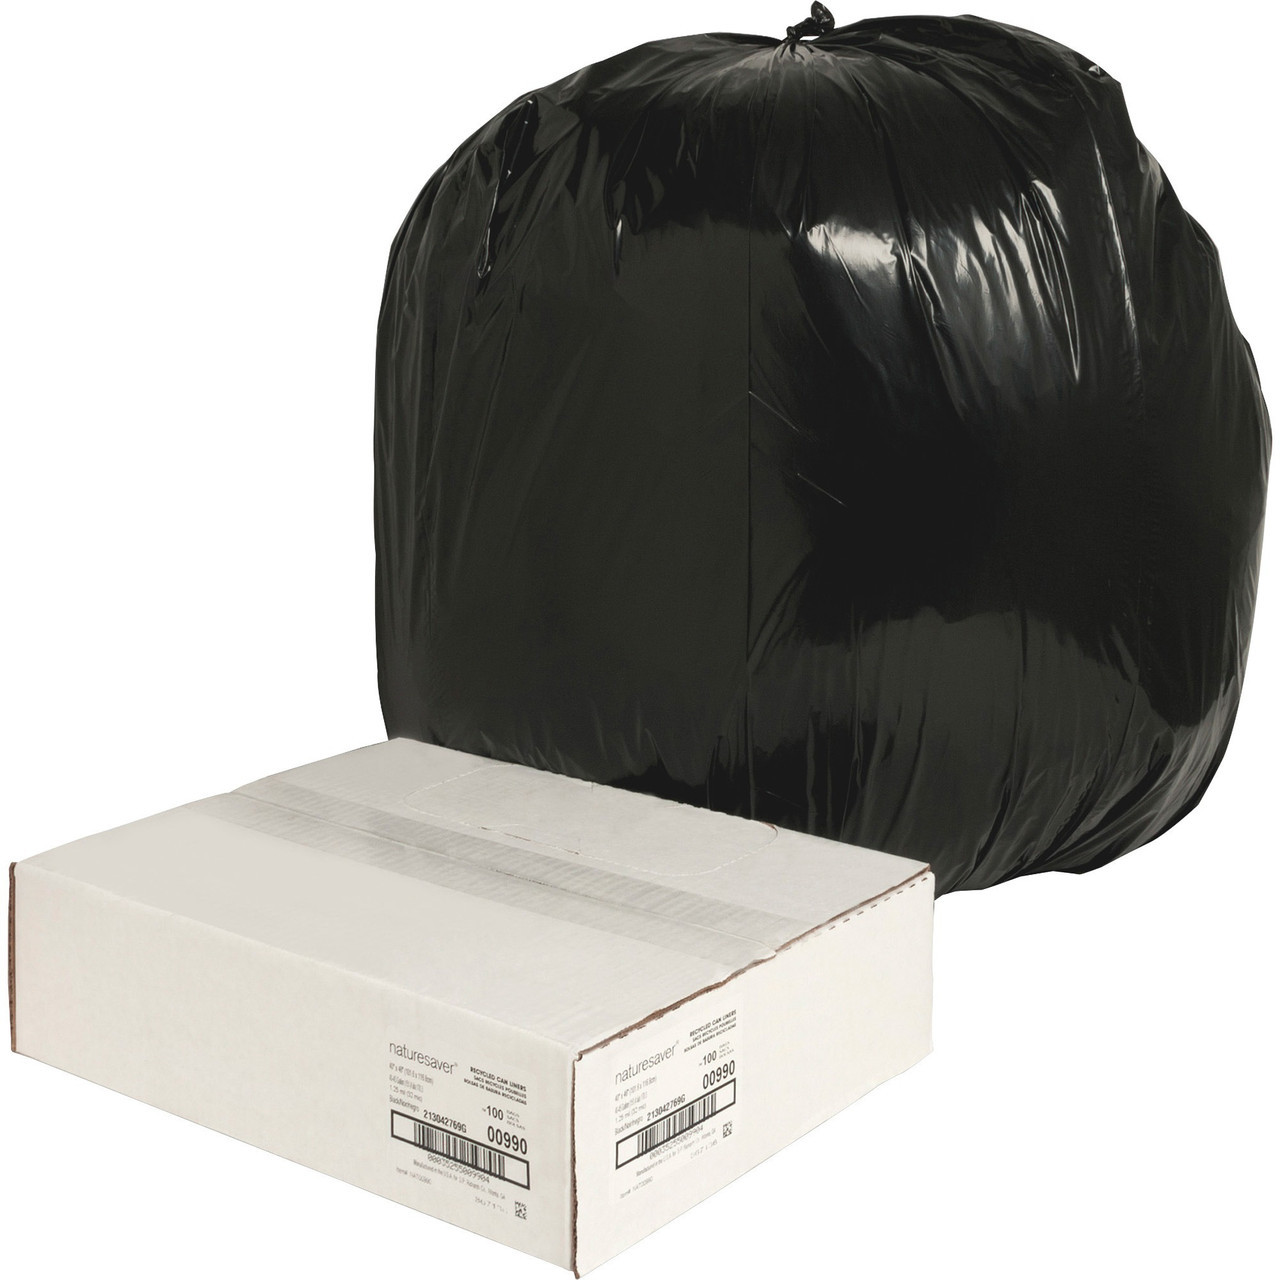 40 Gallon Trash Bags Garbage Bags Can Liners - 23 x 17 x 46 - 40